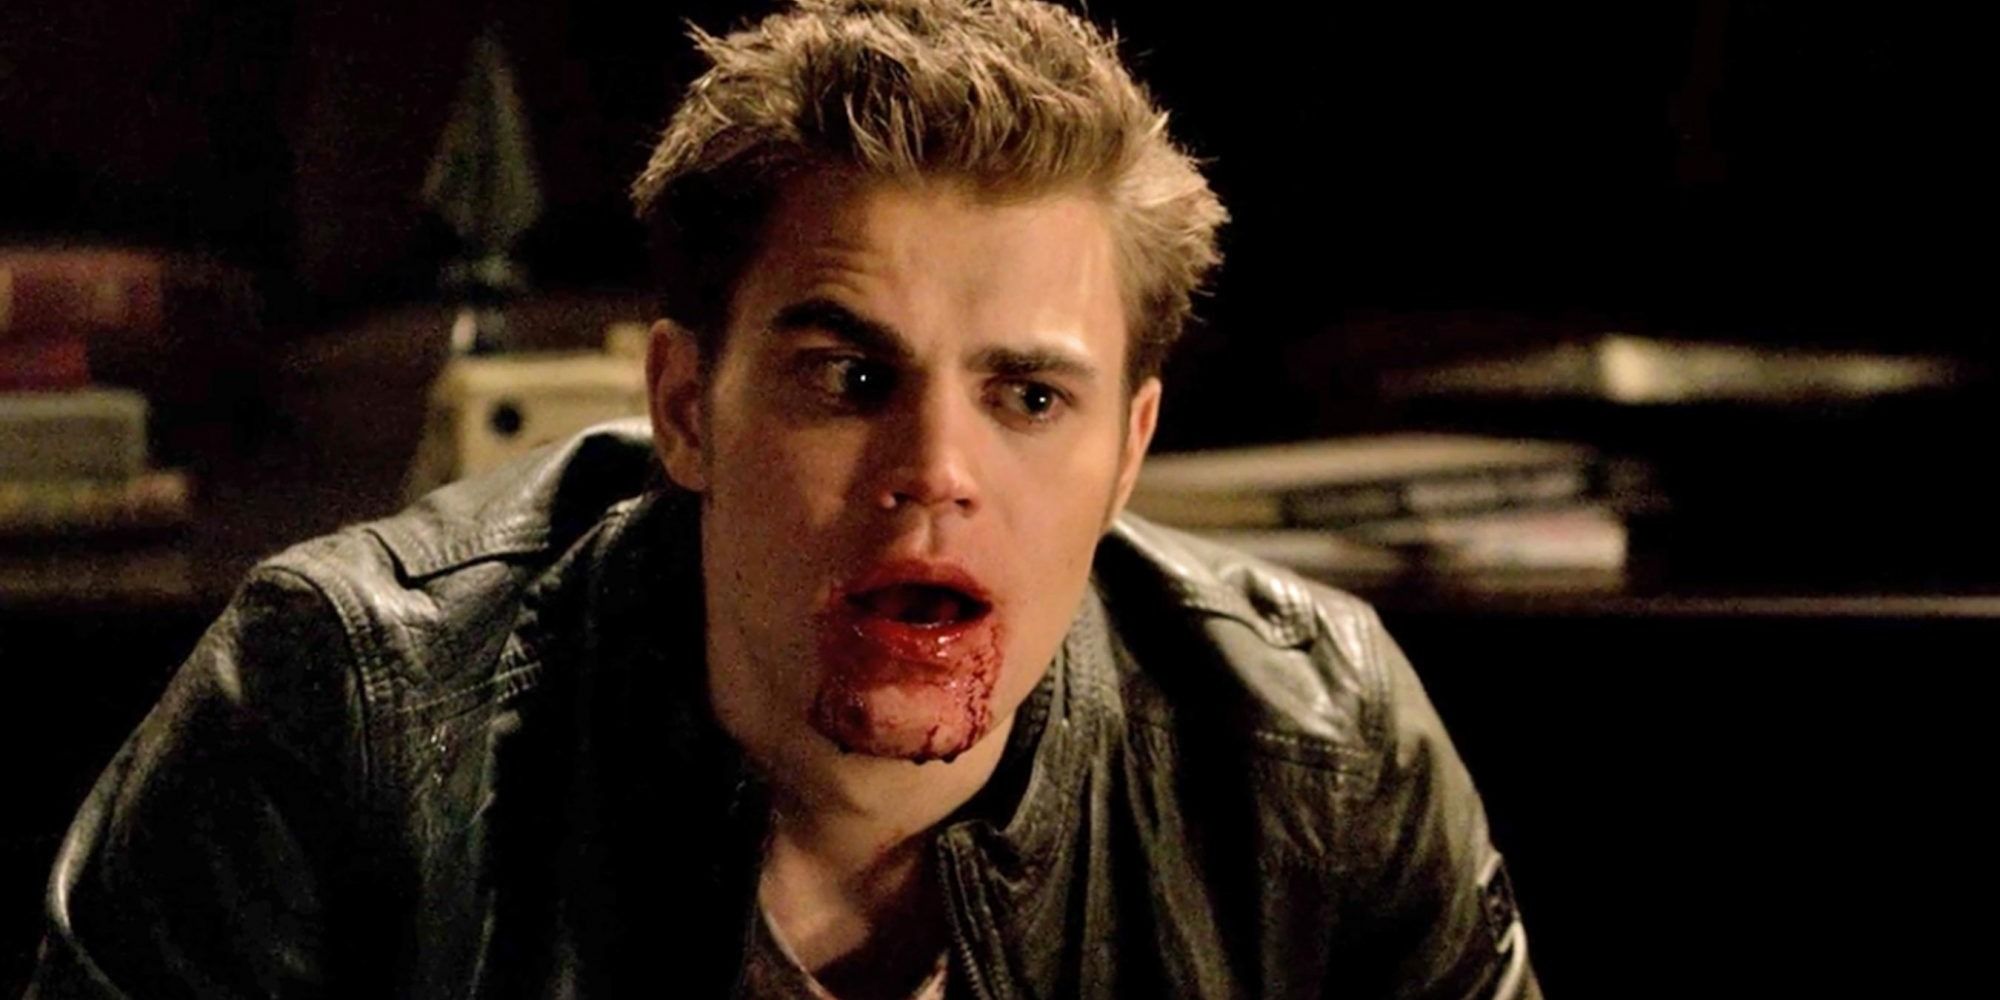 Stefan Salvatore with blood on his mouth in The Vampire Diaries